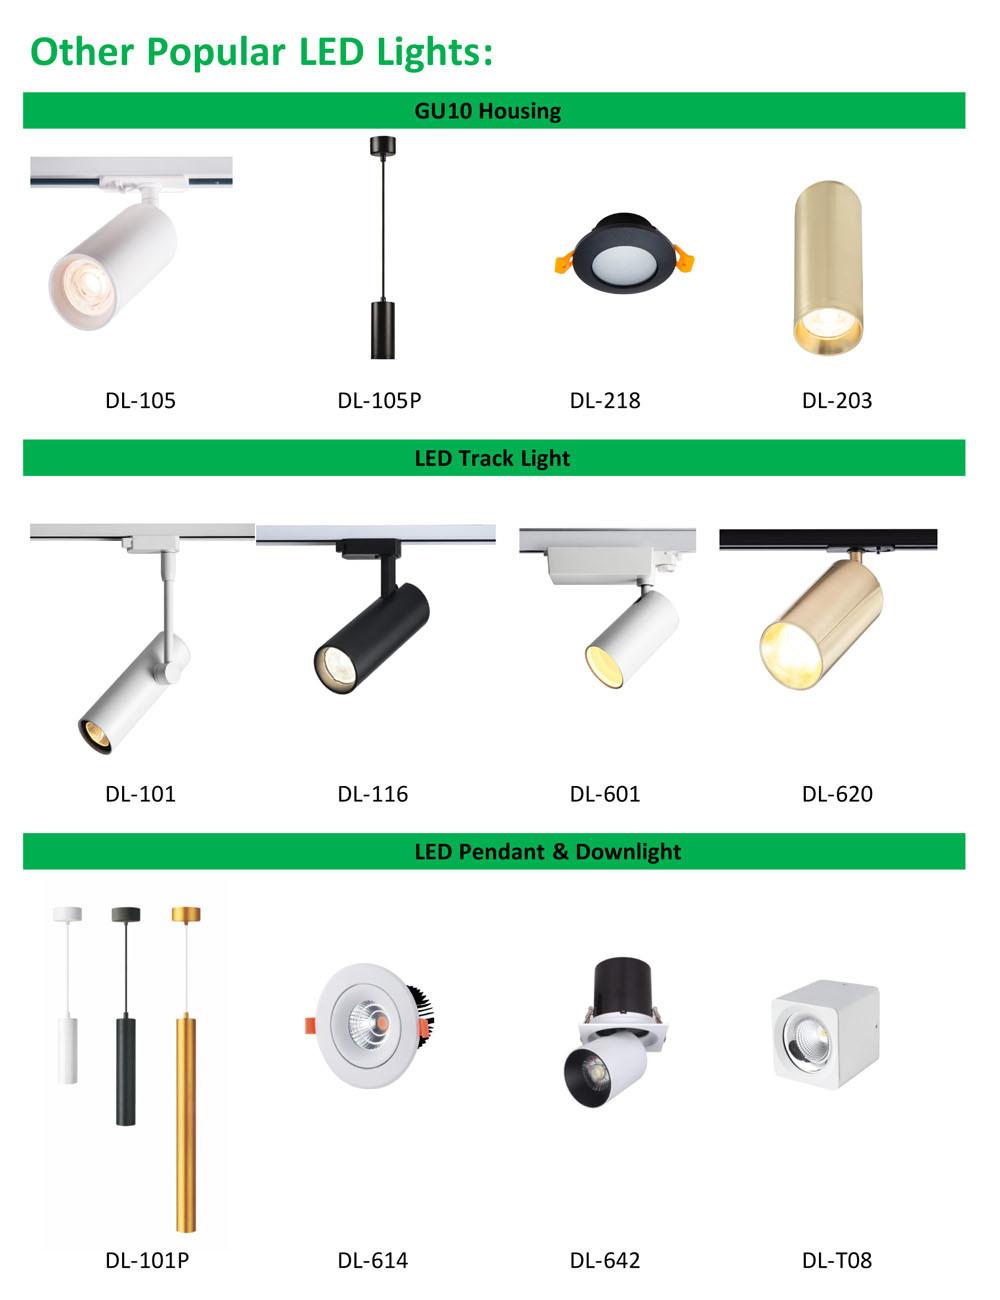 IP65 Home Decorative LED Spotlight Outdoor Commercial GU10 Ceiling Lamp